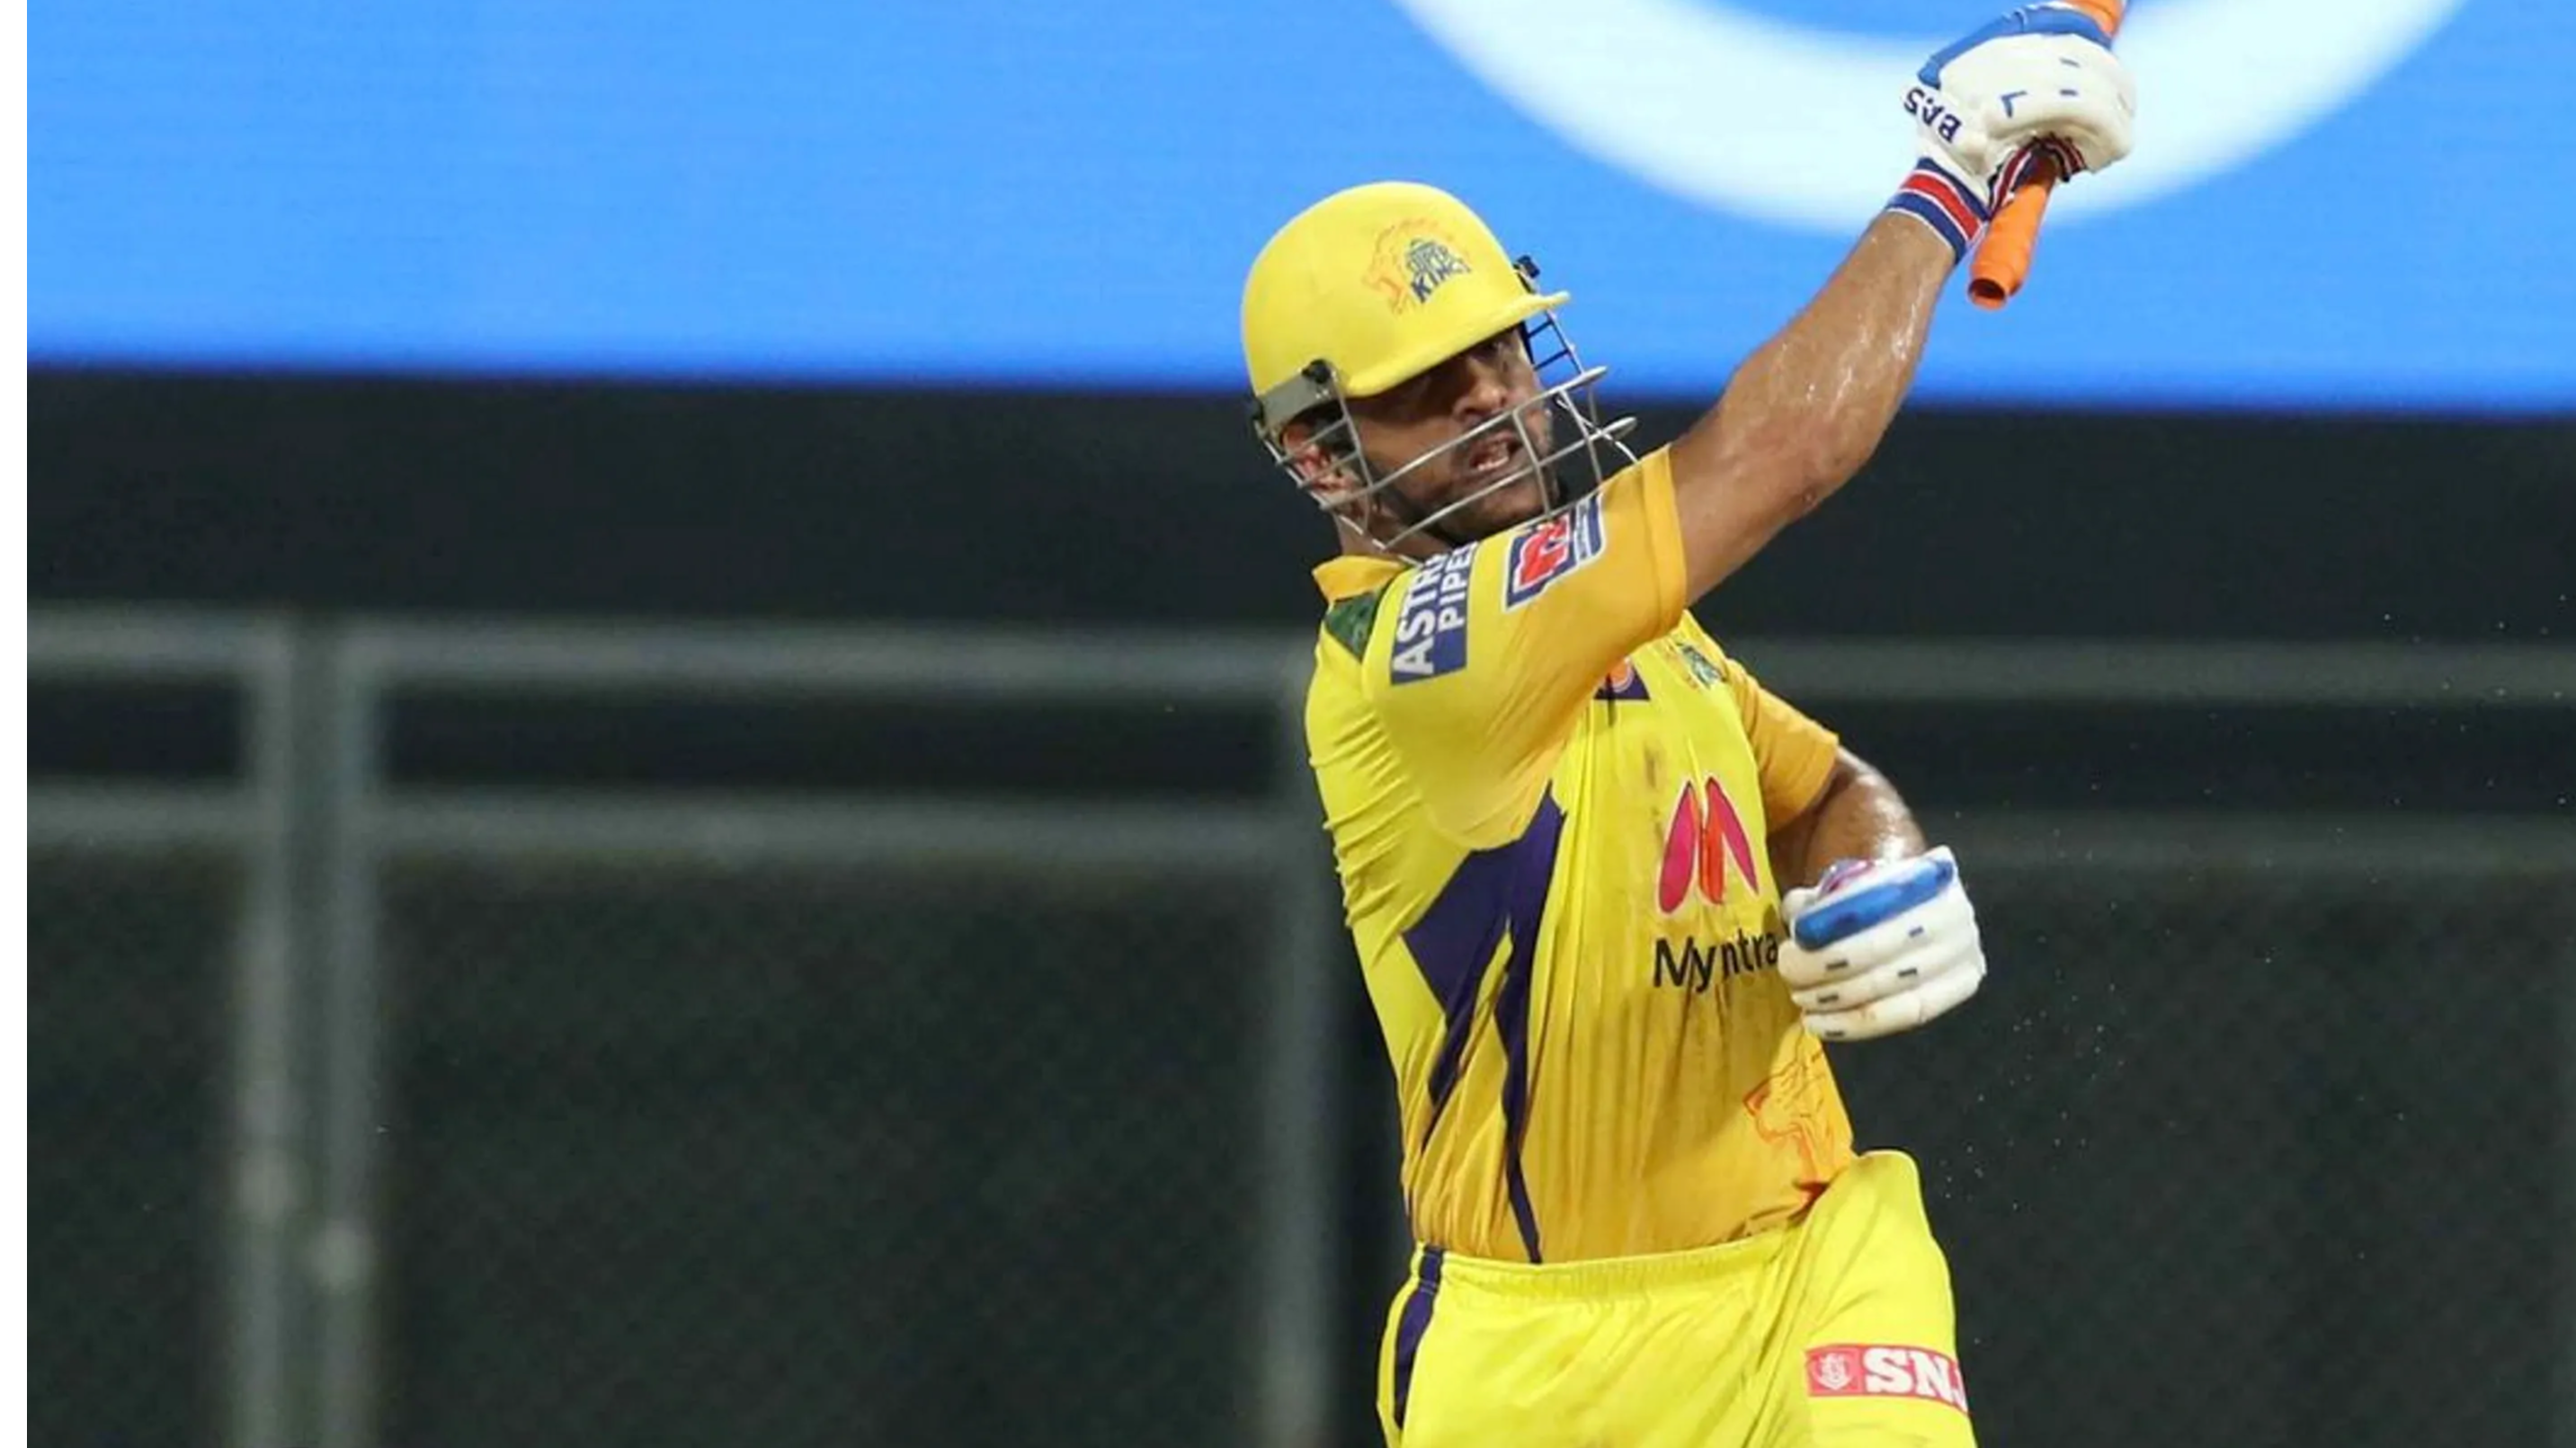 MS Dhoni launches helicopter ahead of CSK’s IPL final tussle with KKR | Watch